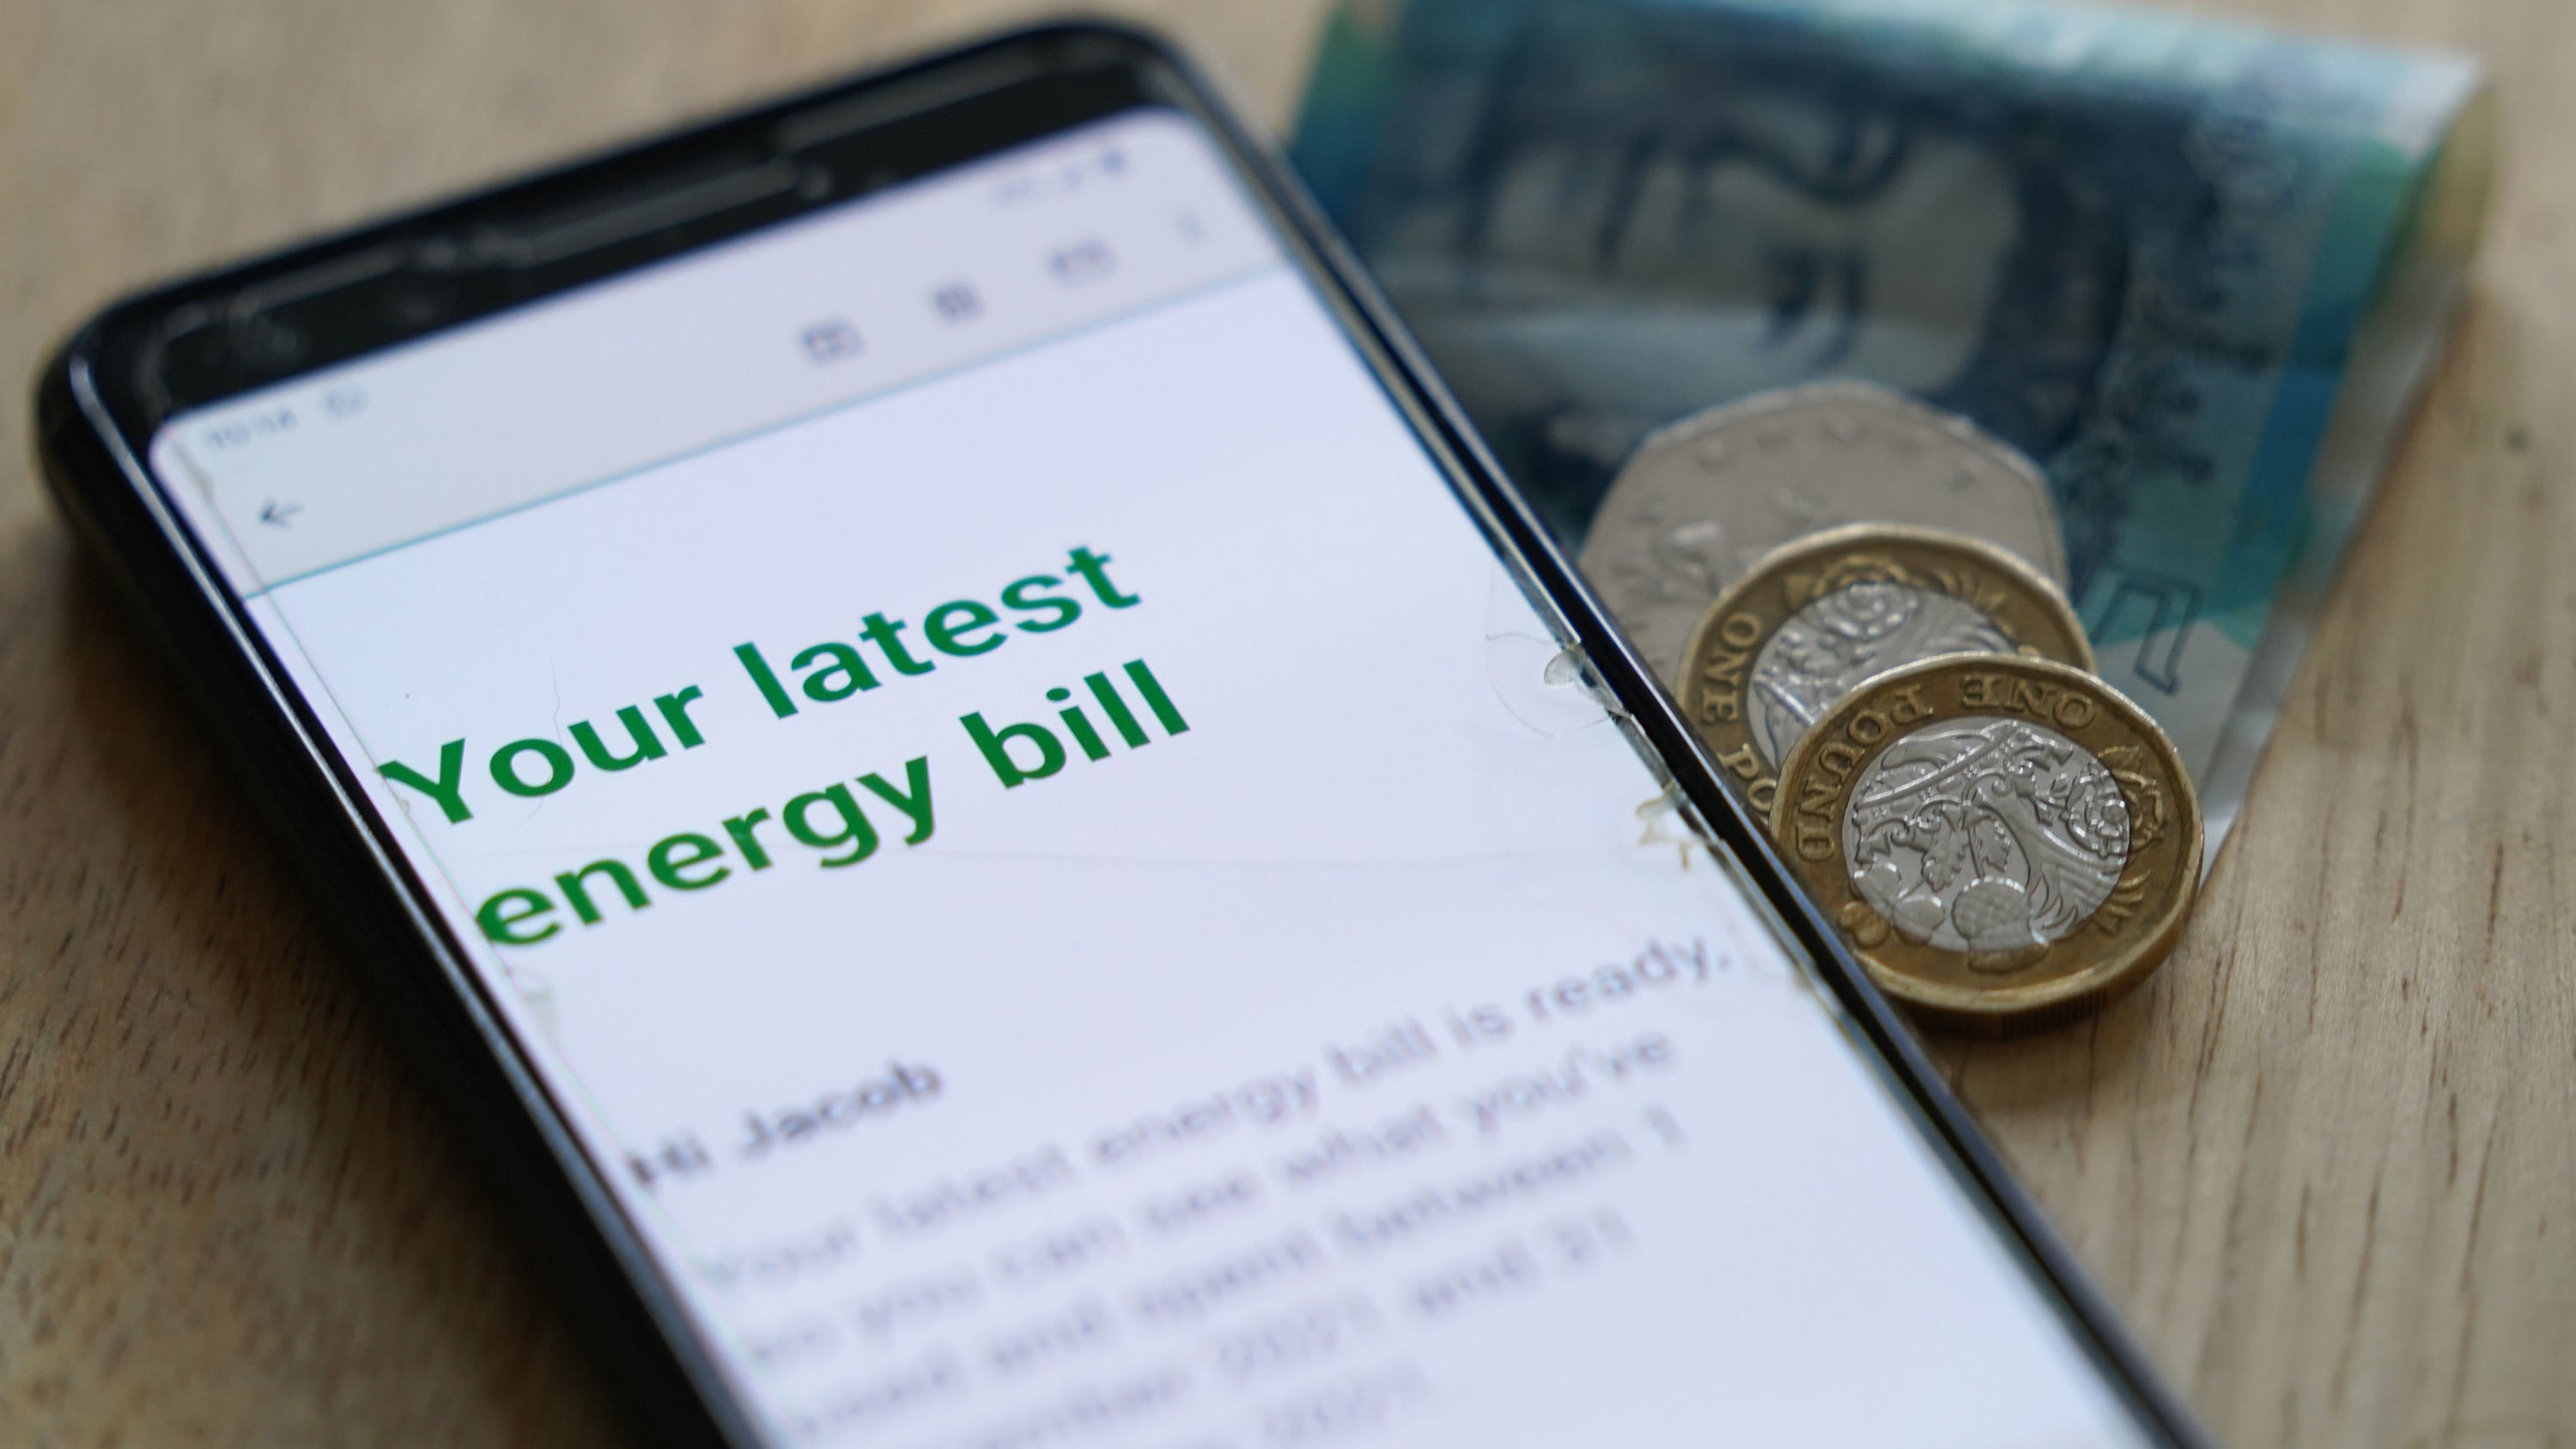 The ban on acquisition-only tariffs was introduced to protect customers during the energy crisis